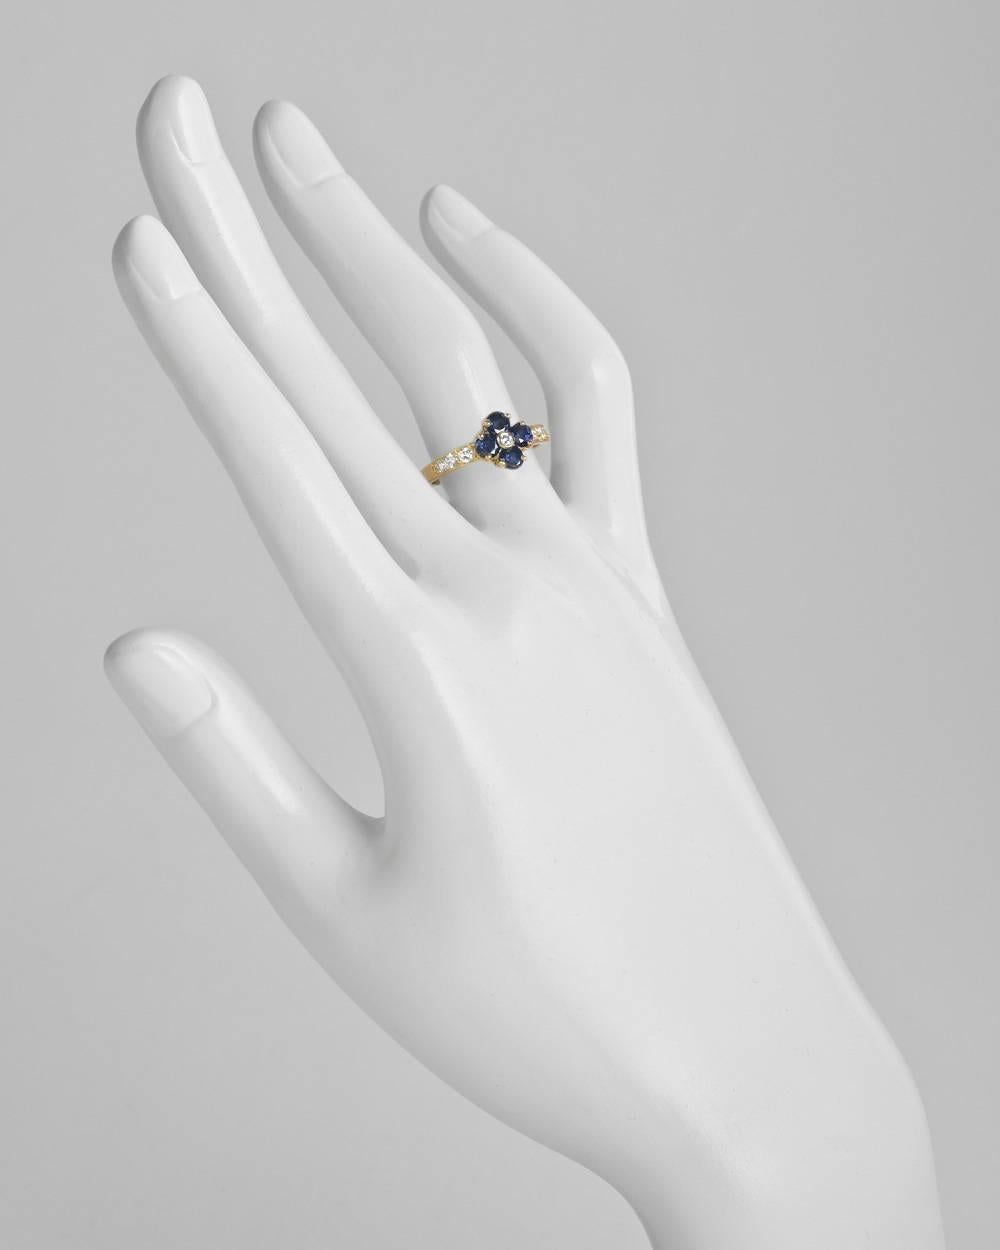 Quatrefoil-shaped flower ring, featuring four round-cut sapphire 'petals' surrounding a bezel-set round brilliant-cut diamond center, with partway round-cut diamond-set band, in 18k yellow gold, signed Van Cleef & Arpels. Seven diamonds weighing